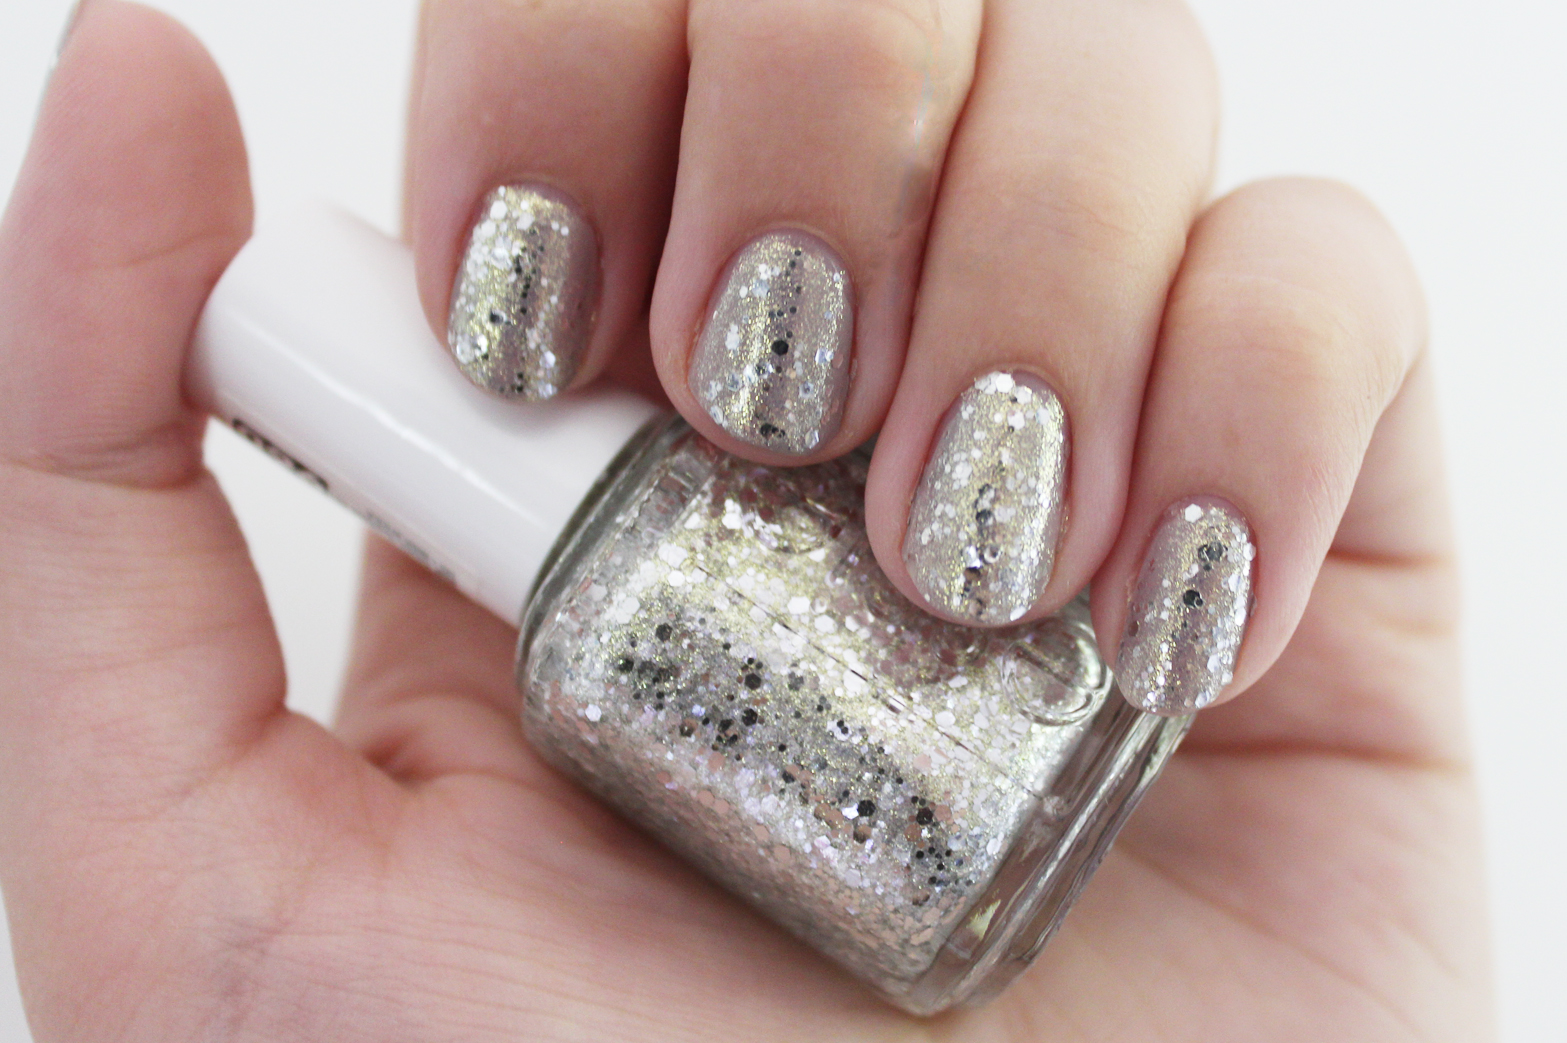 NOTD | Essie Take It Outside + Hors d'Oeuvres - CassandraMyee